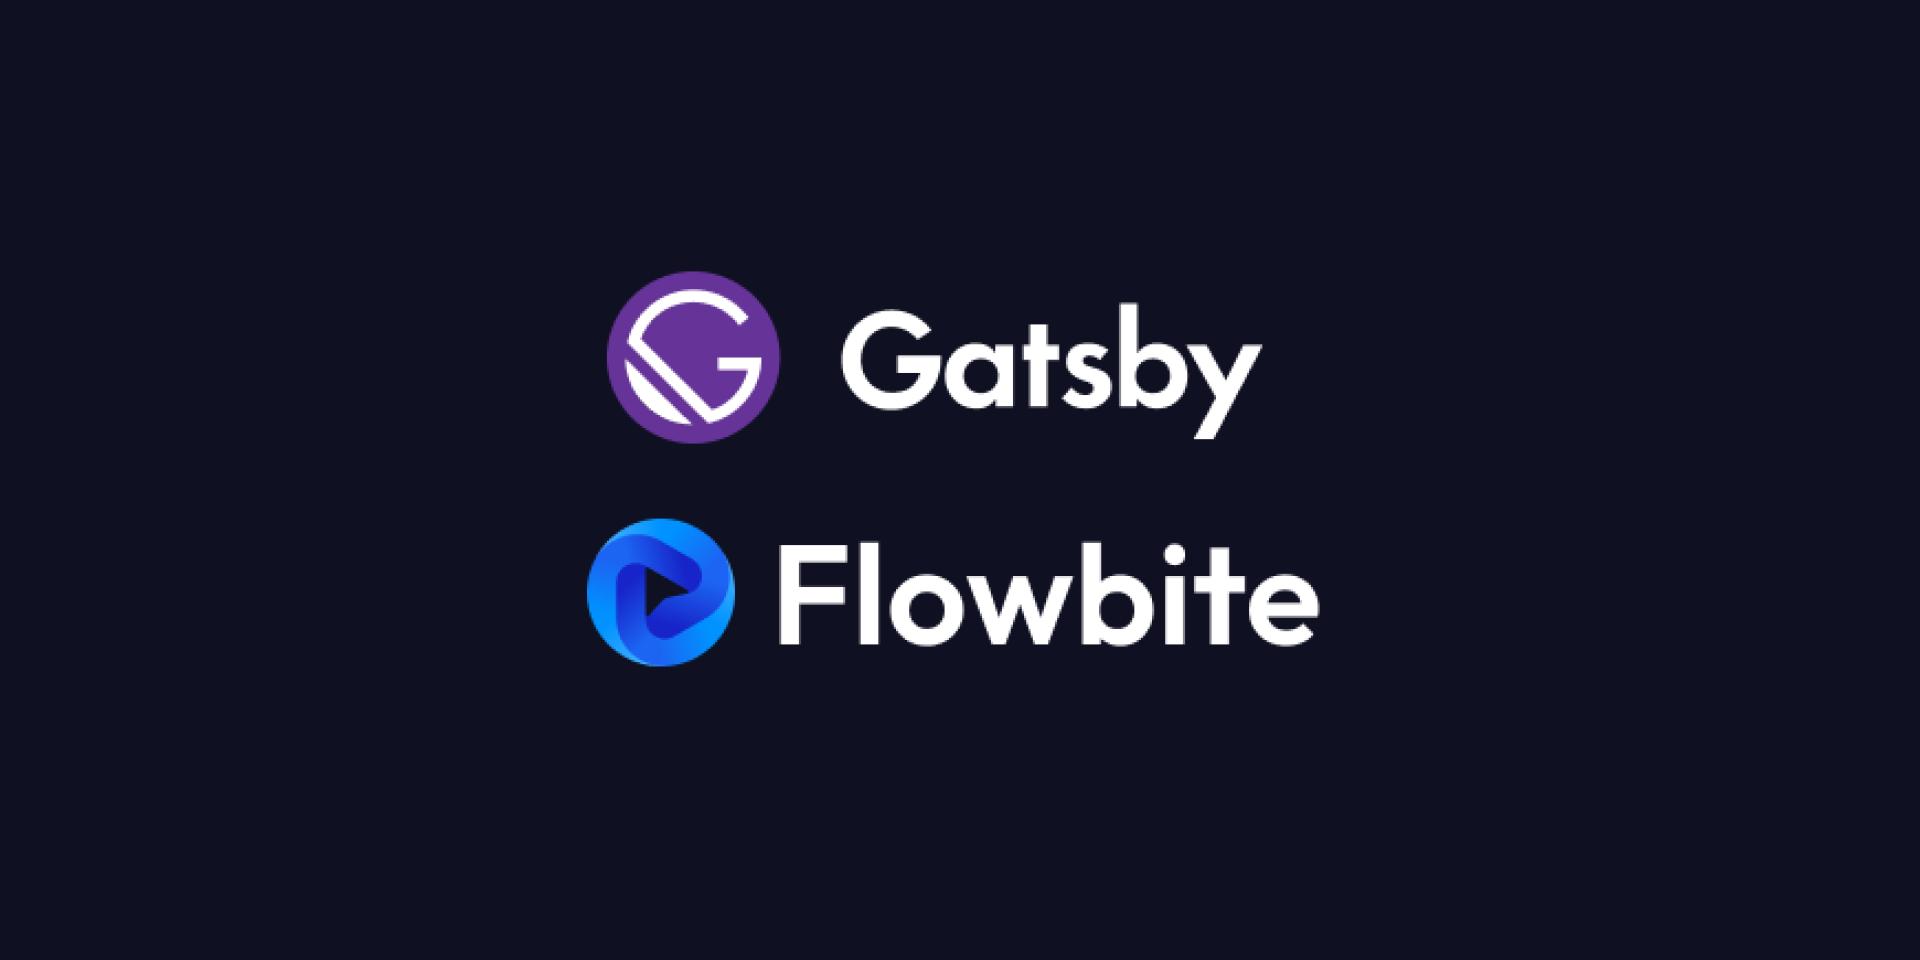 How to install Gatsby with Tailwind CSS and Flowbite